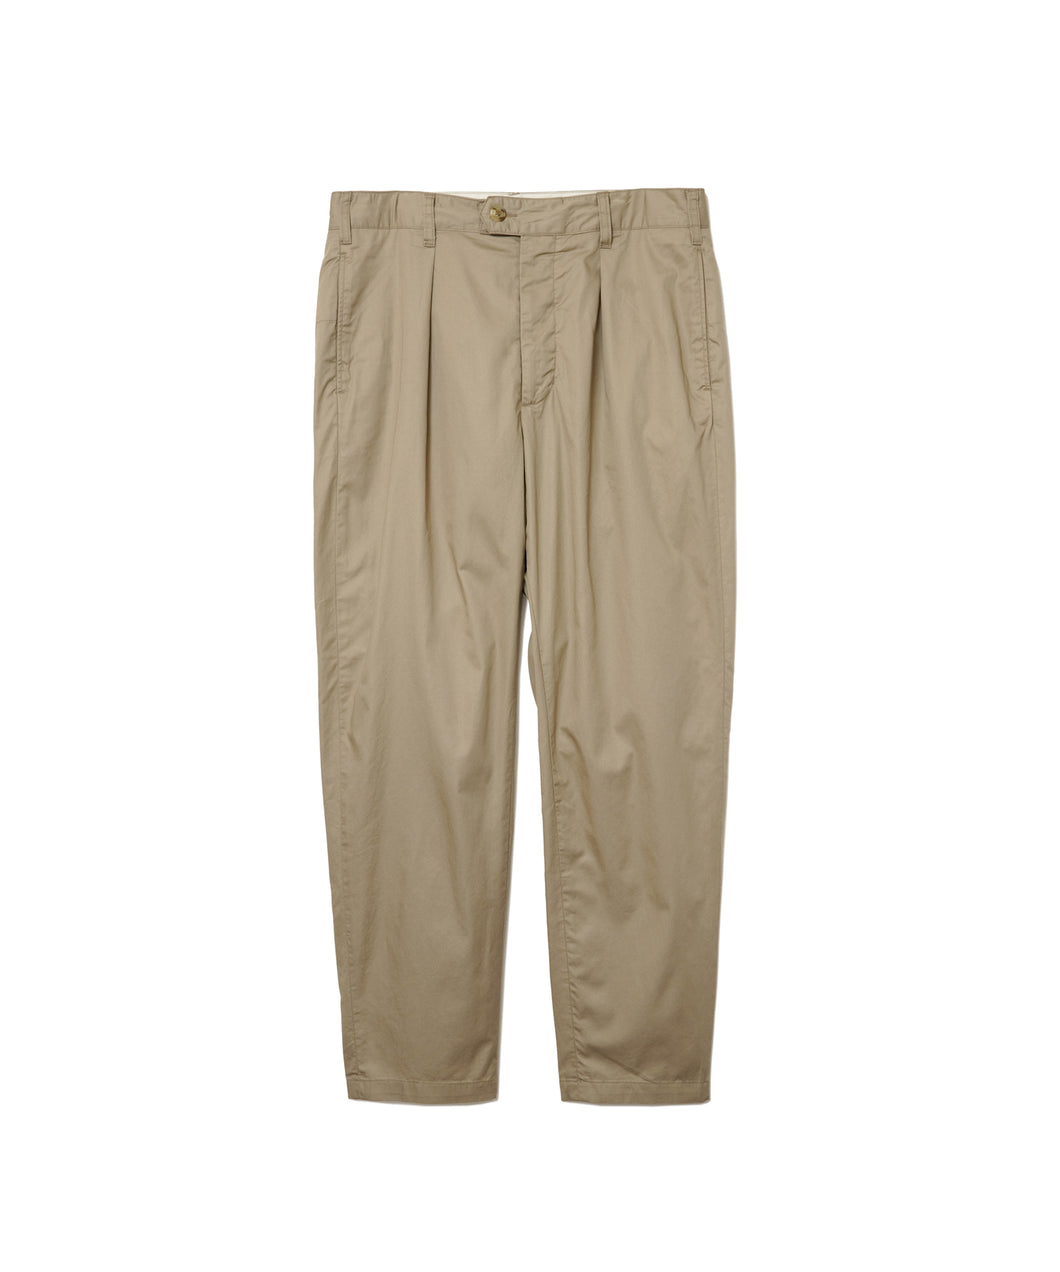 【MEN】ENGINEERED GARMENTS Carlyle Pant - High Count Twill